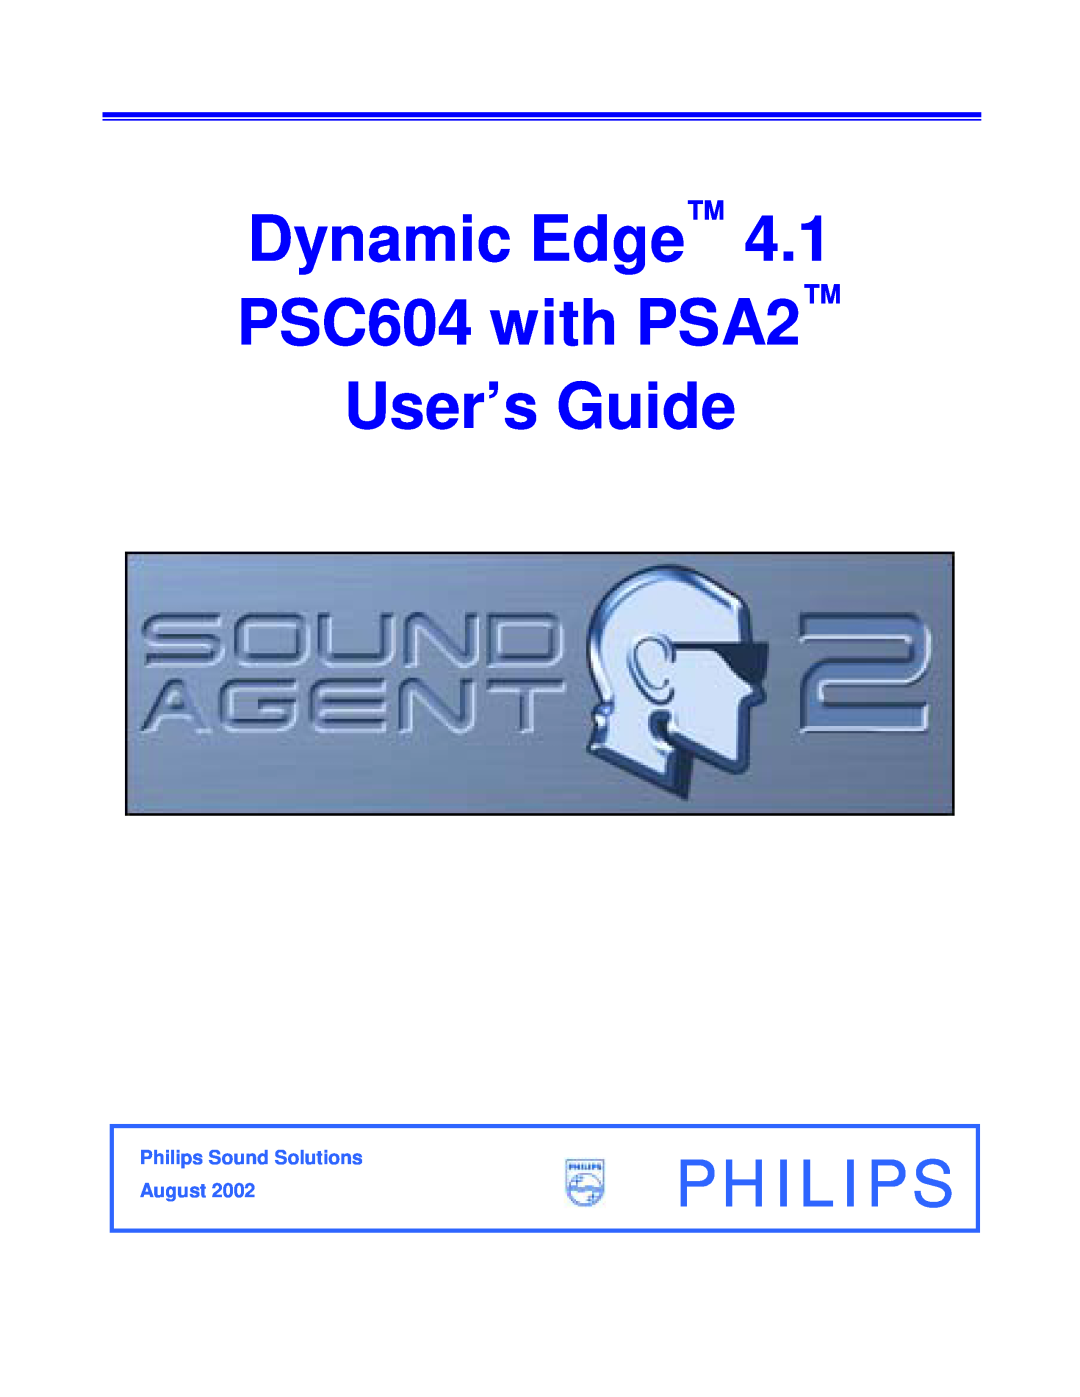 Philips manual Dynamic Edge 4.1 PSC604 with PSA2 User’s Guide, Philips Sound Solutions August 